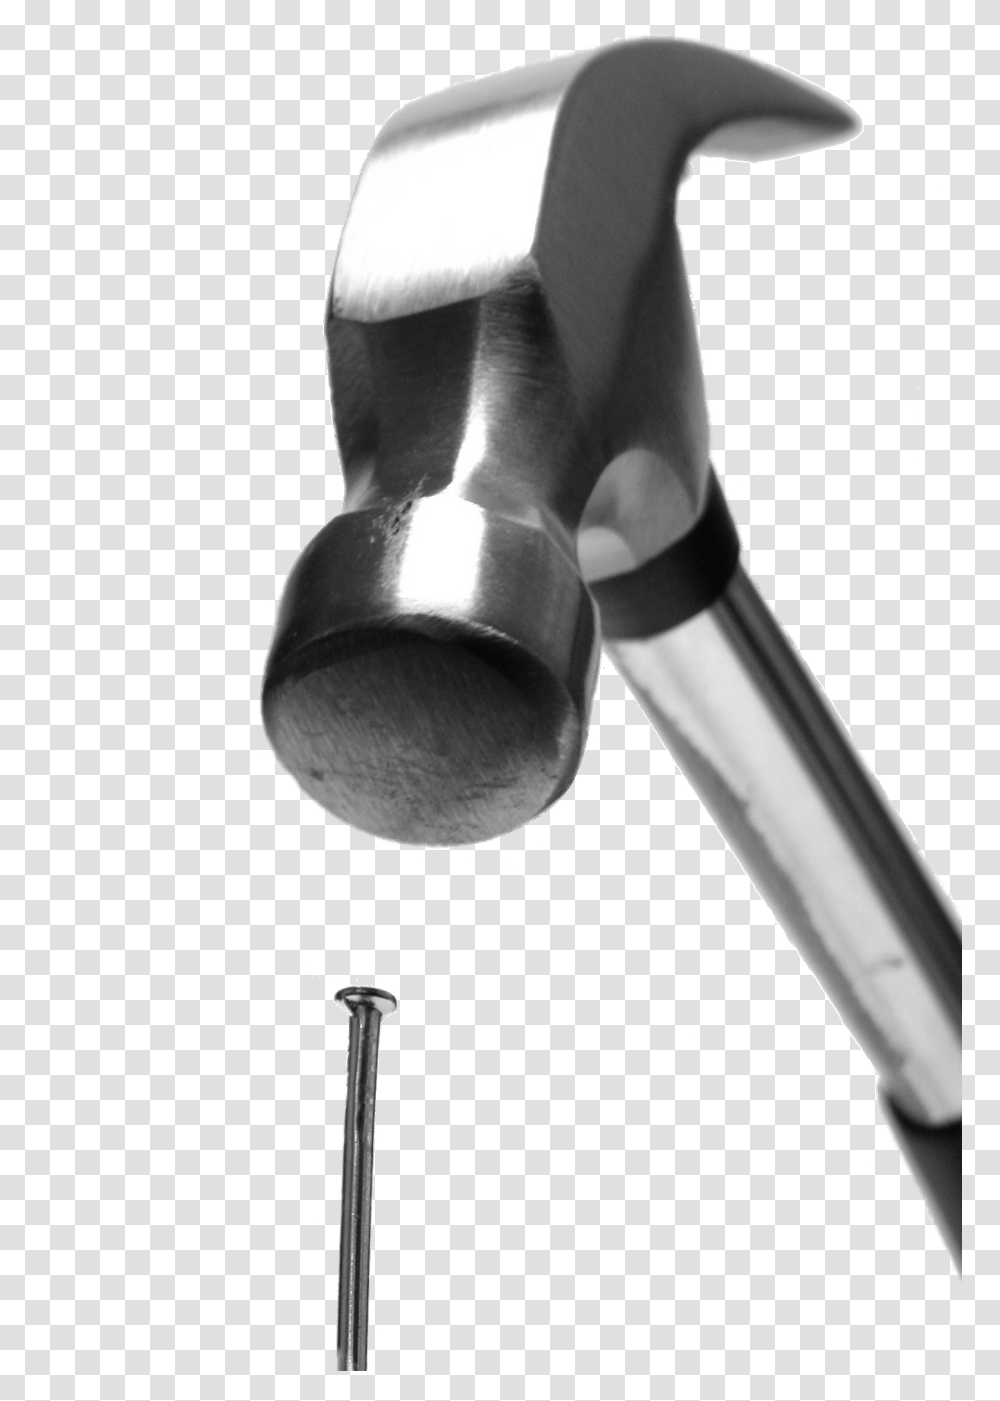 Hammer Hitting Nail You Have A Hammer Everything Looks Like A N, Tool, Plumbing, Smoke Pipe, Wax Seal Transparent Png